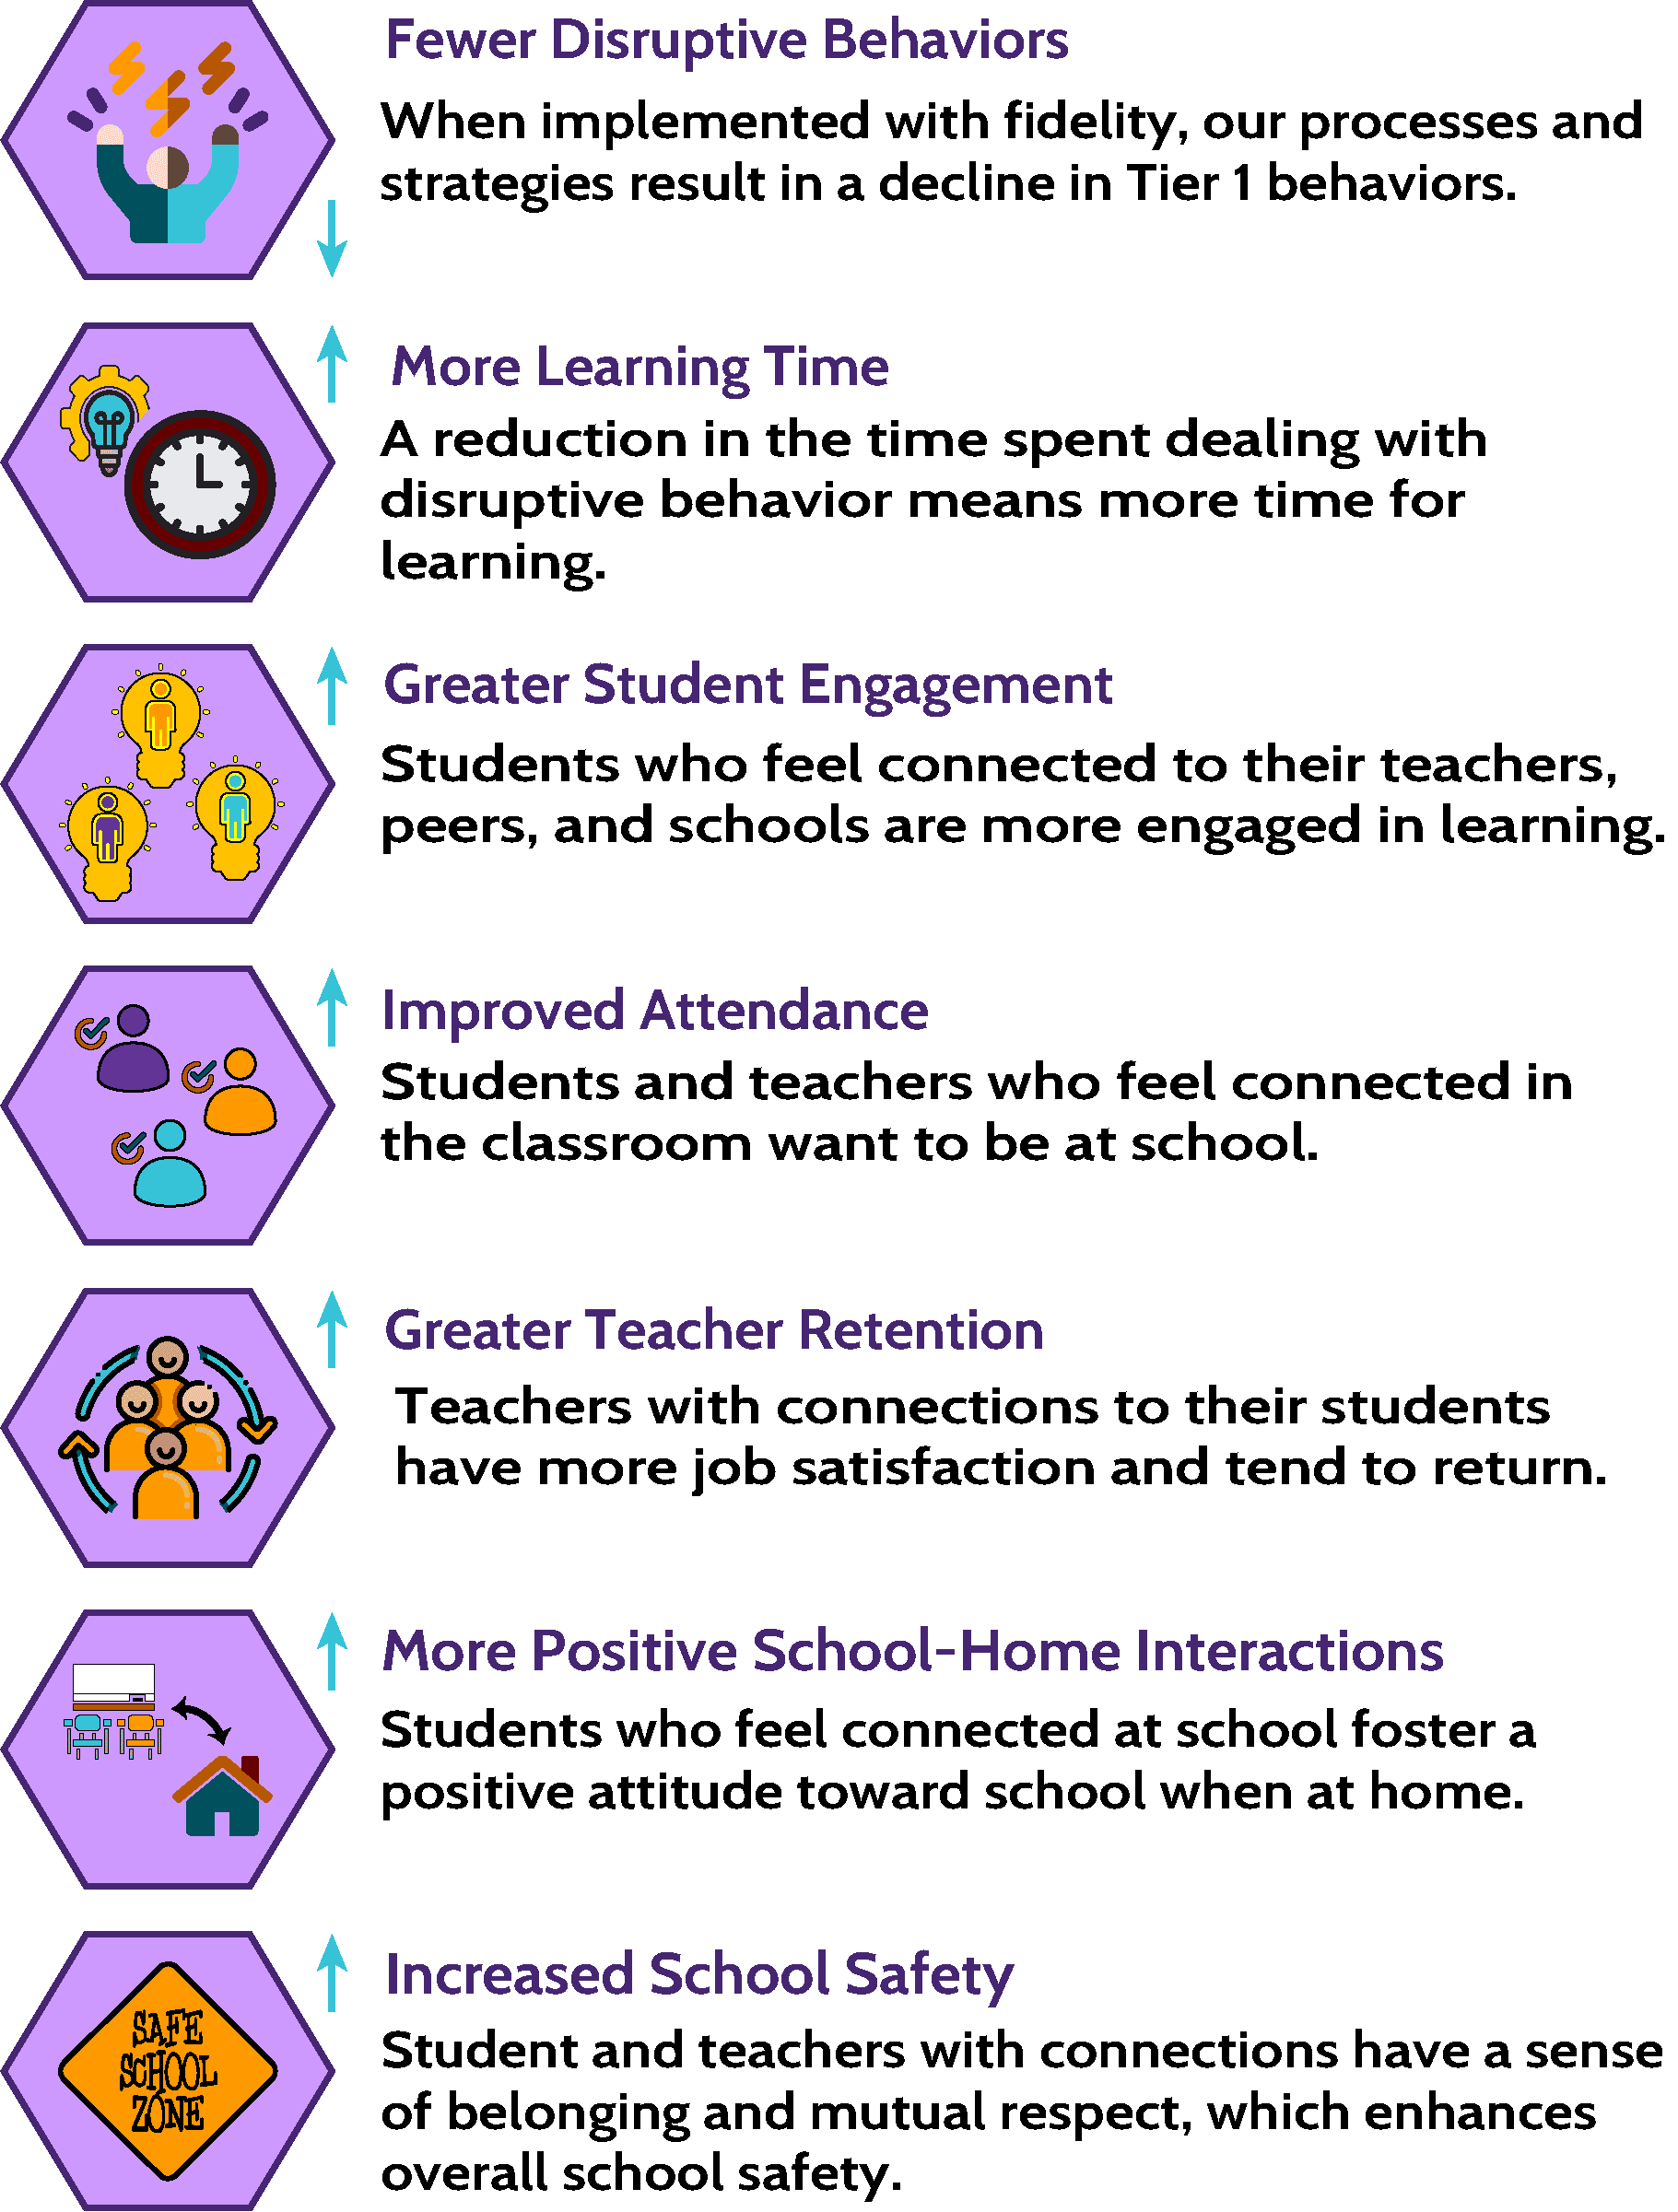 Our Results Infographic Fewer Disruptive Behaviors - When implemented with fidelity, our processes and strategies result in a decline in Tier 1 behaviors. More Learning Time - A reduction in the time spent dealing with disruptive behavior means more time for learning. Greater Student Engagement - Teachers who feel connected to their teachers, peers, and schools are more engaged in learning. Improved Attendance - Students and teachers who feel connected in the classroom want to be at school. Greater Teacher Retention - Teachers who feel connected to their students have more job satisfaction and tend to return. More Positive School-Home Interactions - Students who feel connected at school foster a positive attitude toward school when at home. Increased School Safety - Students and teachers with connections have a sense of belonging and mutual respect, which enhances overall school safety.